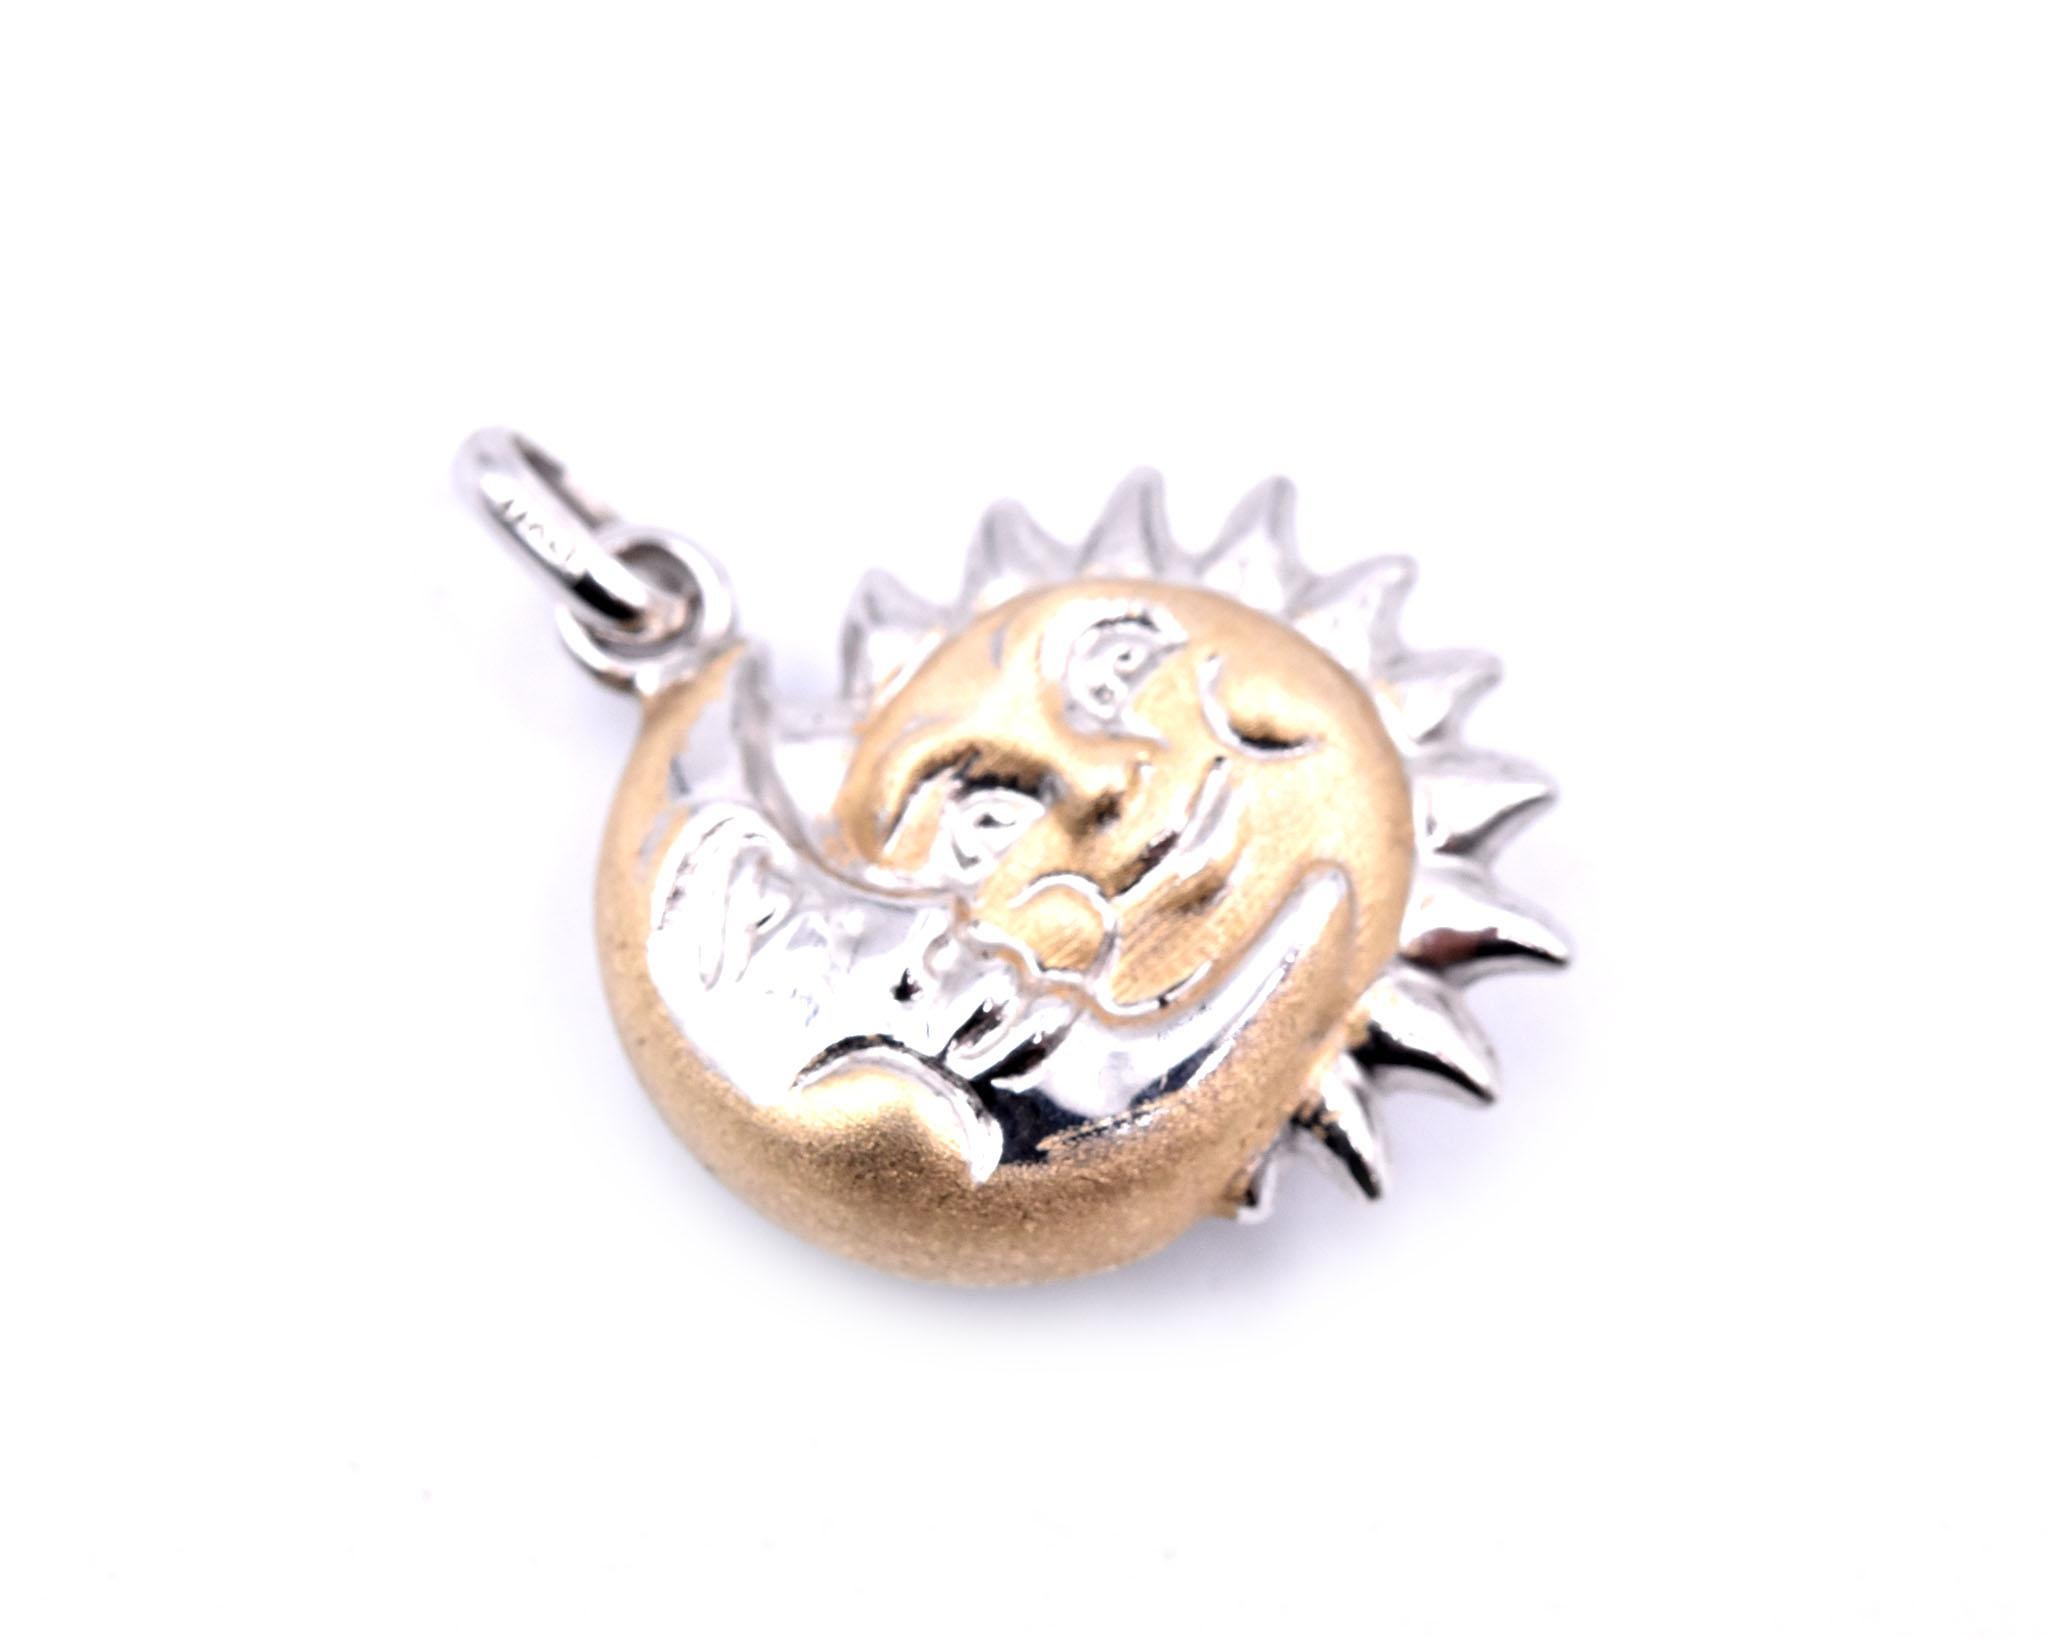 Designer: custom design
Material: sterling silver two-tone
Dimensions: pendant is ¼-inch and 20.24mm wide
Weight: 2.30 grams